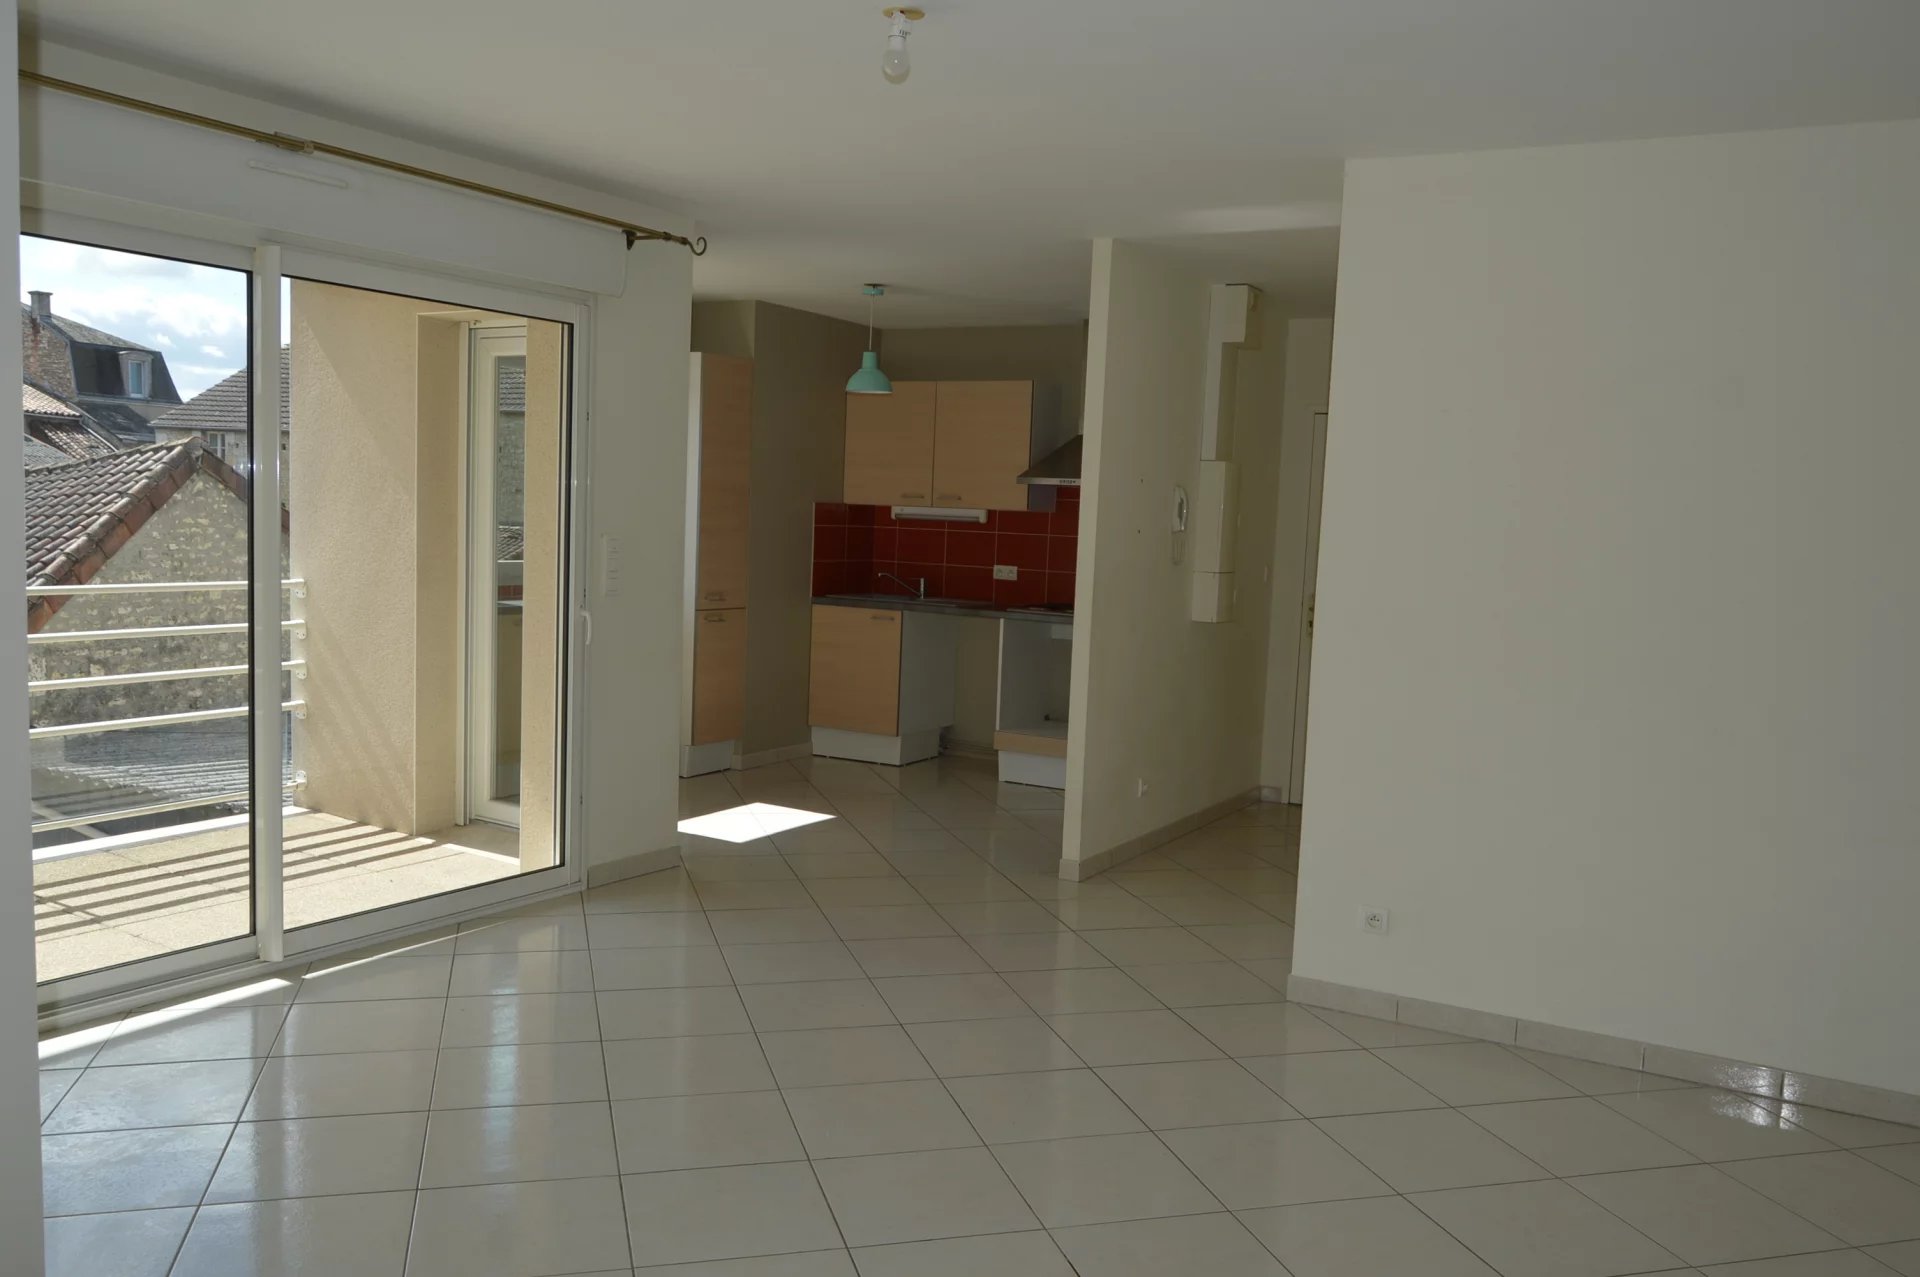 Ideal location - two bedroom flat with balcony and garage in a residence with lift